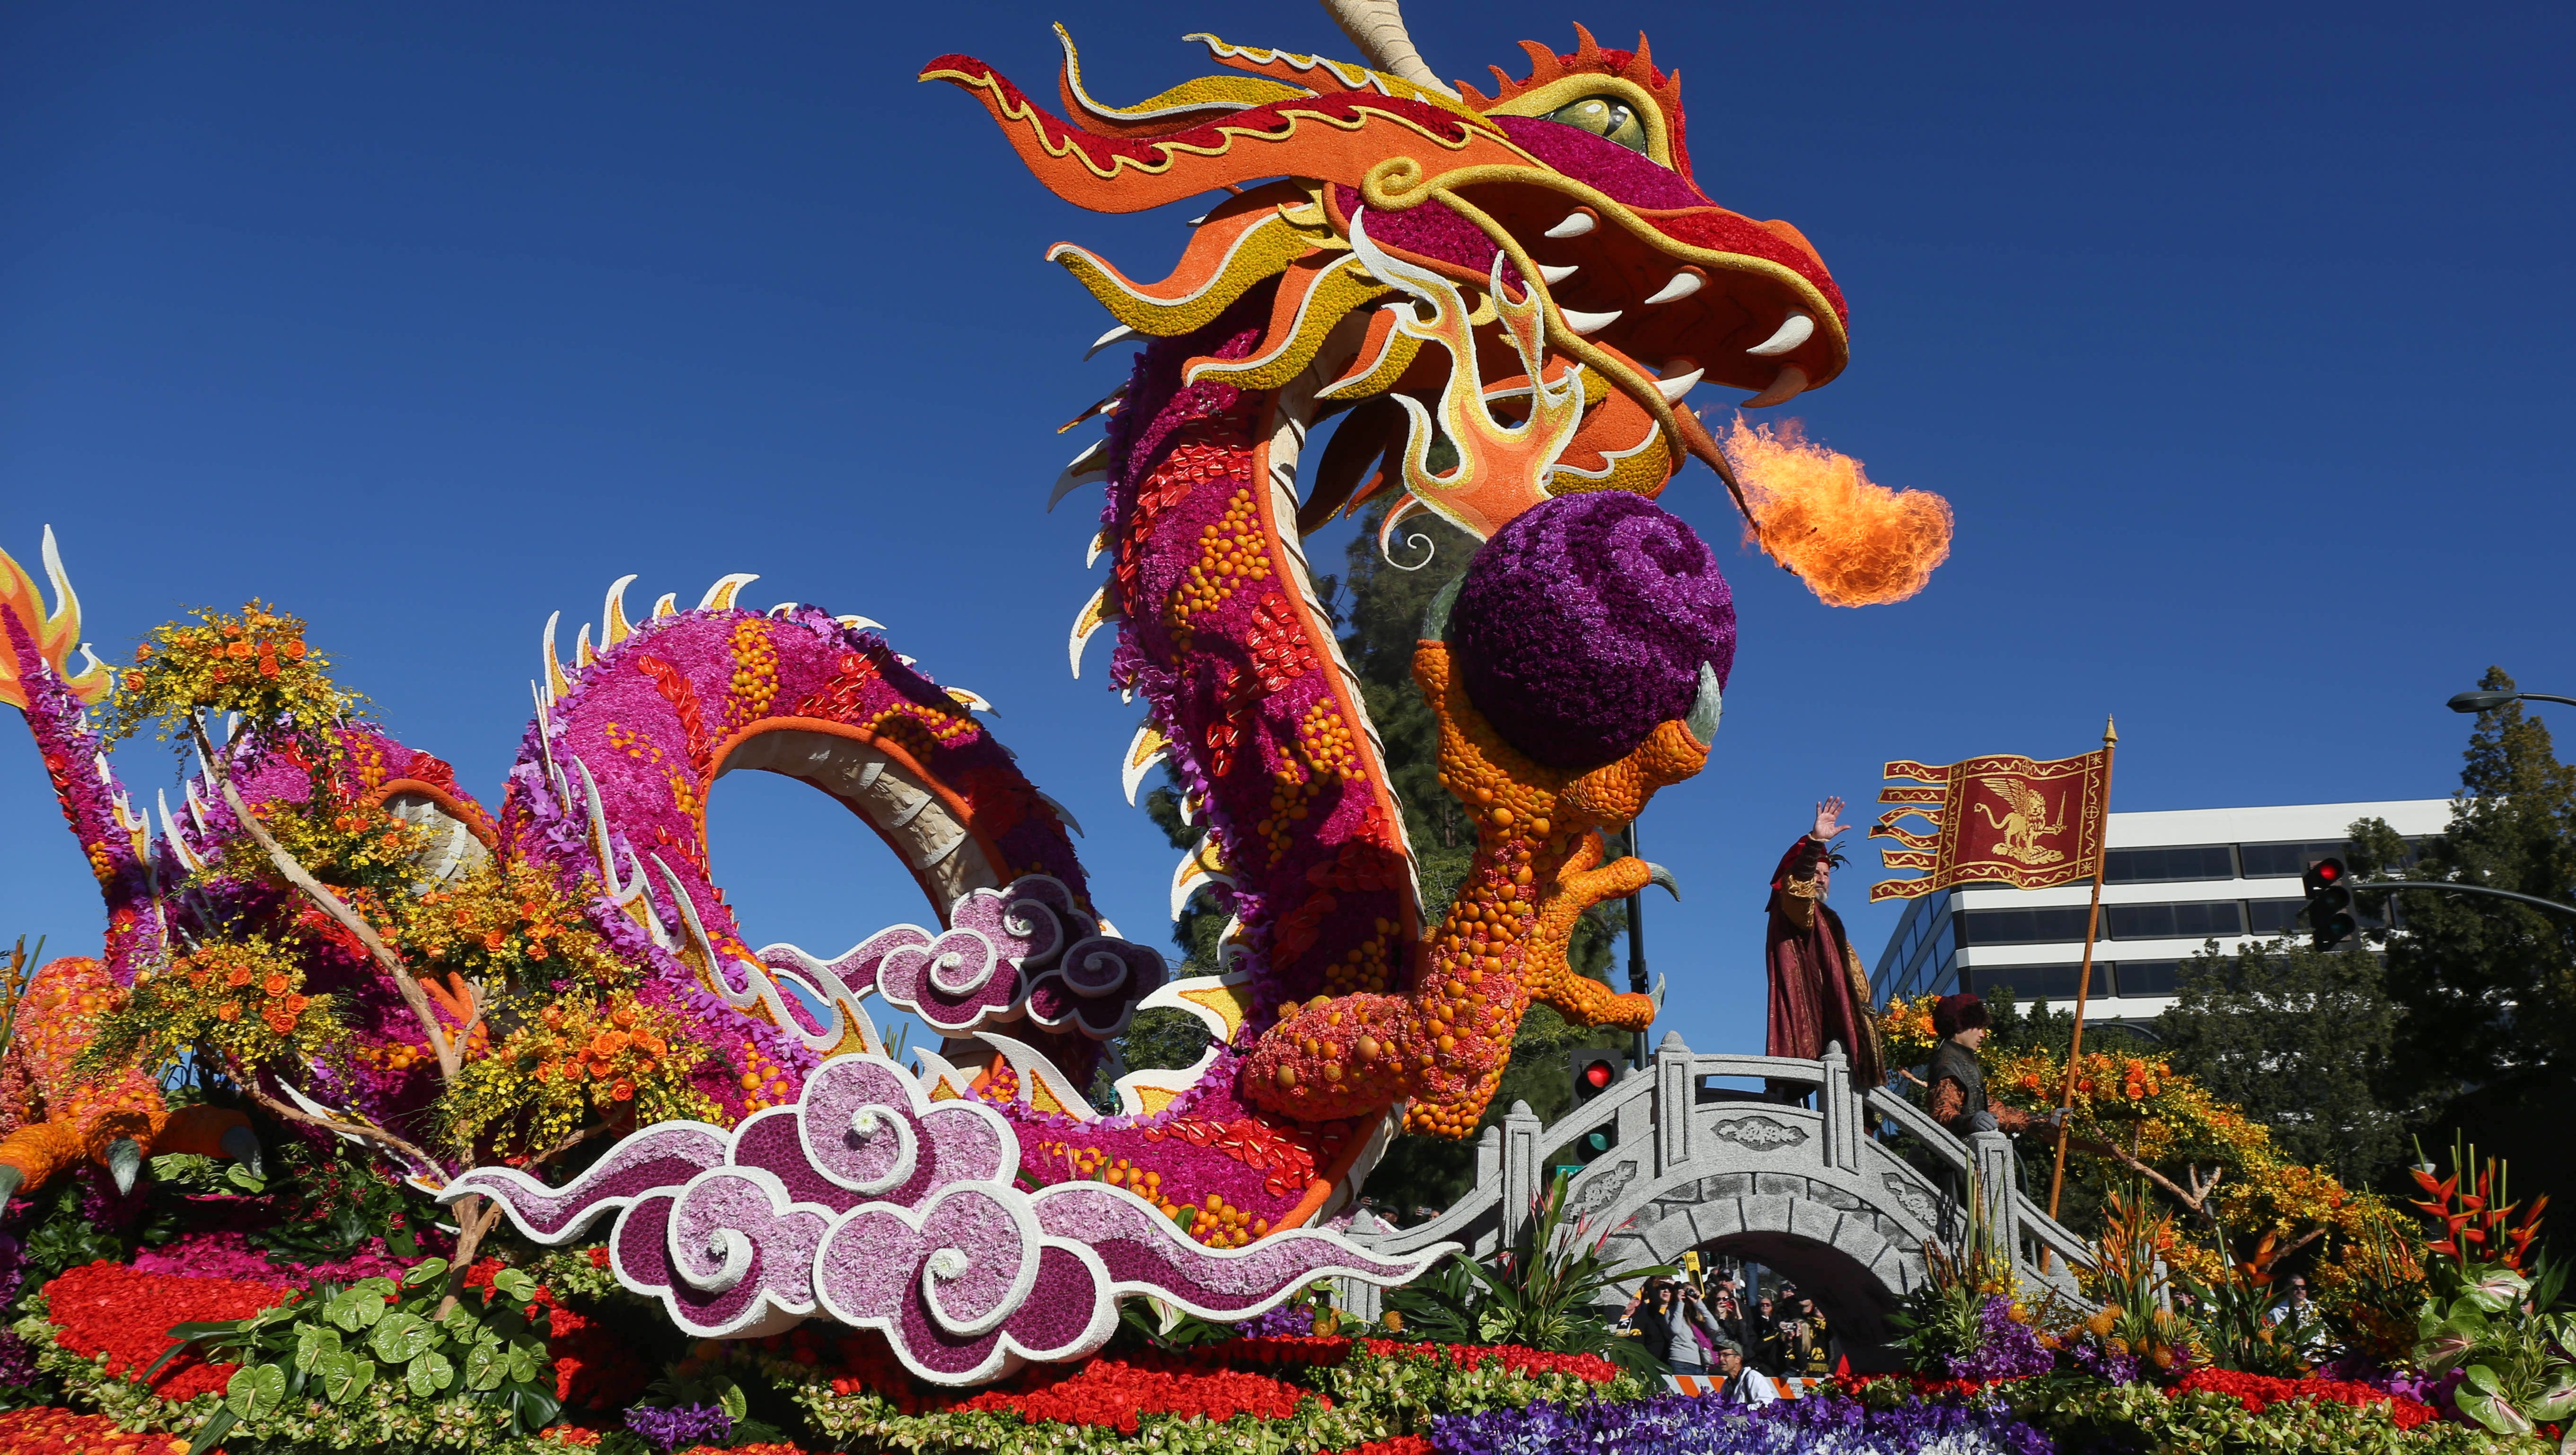 A dragon float breathes fire on Friday, Jan. 1, 2016, during the 2016 Tournament of Roses Parade in Pasadena, Calif.